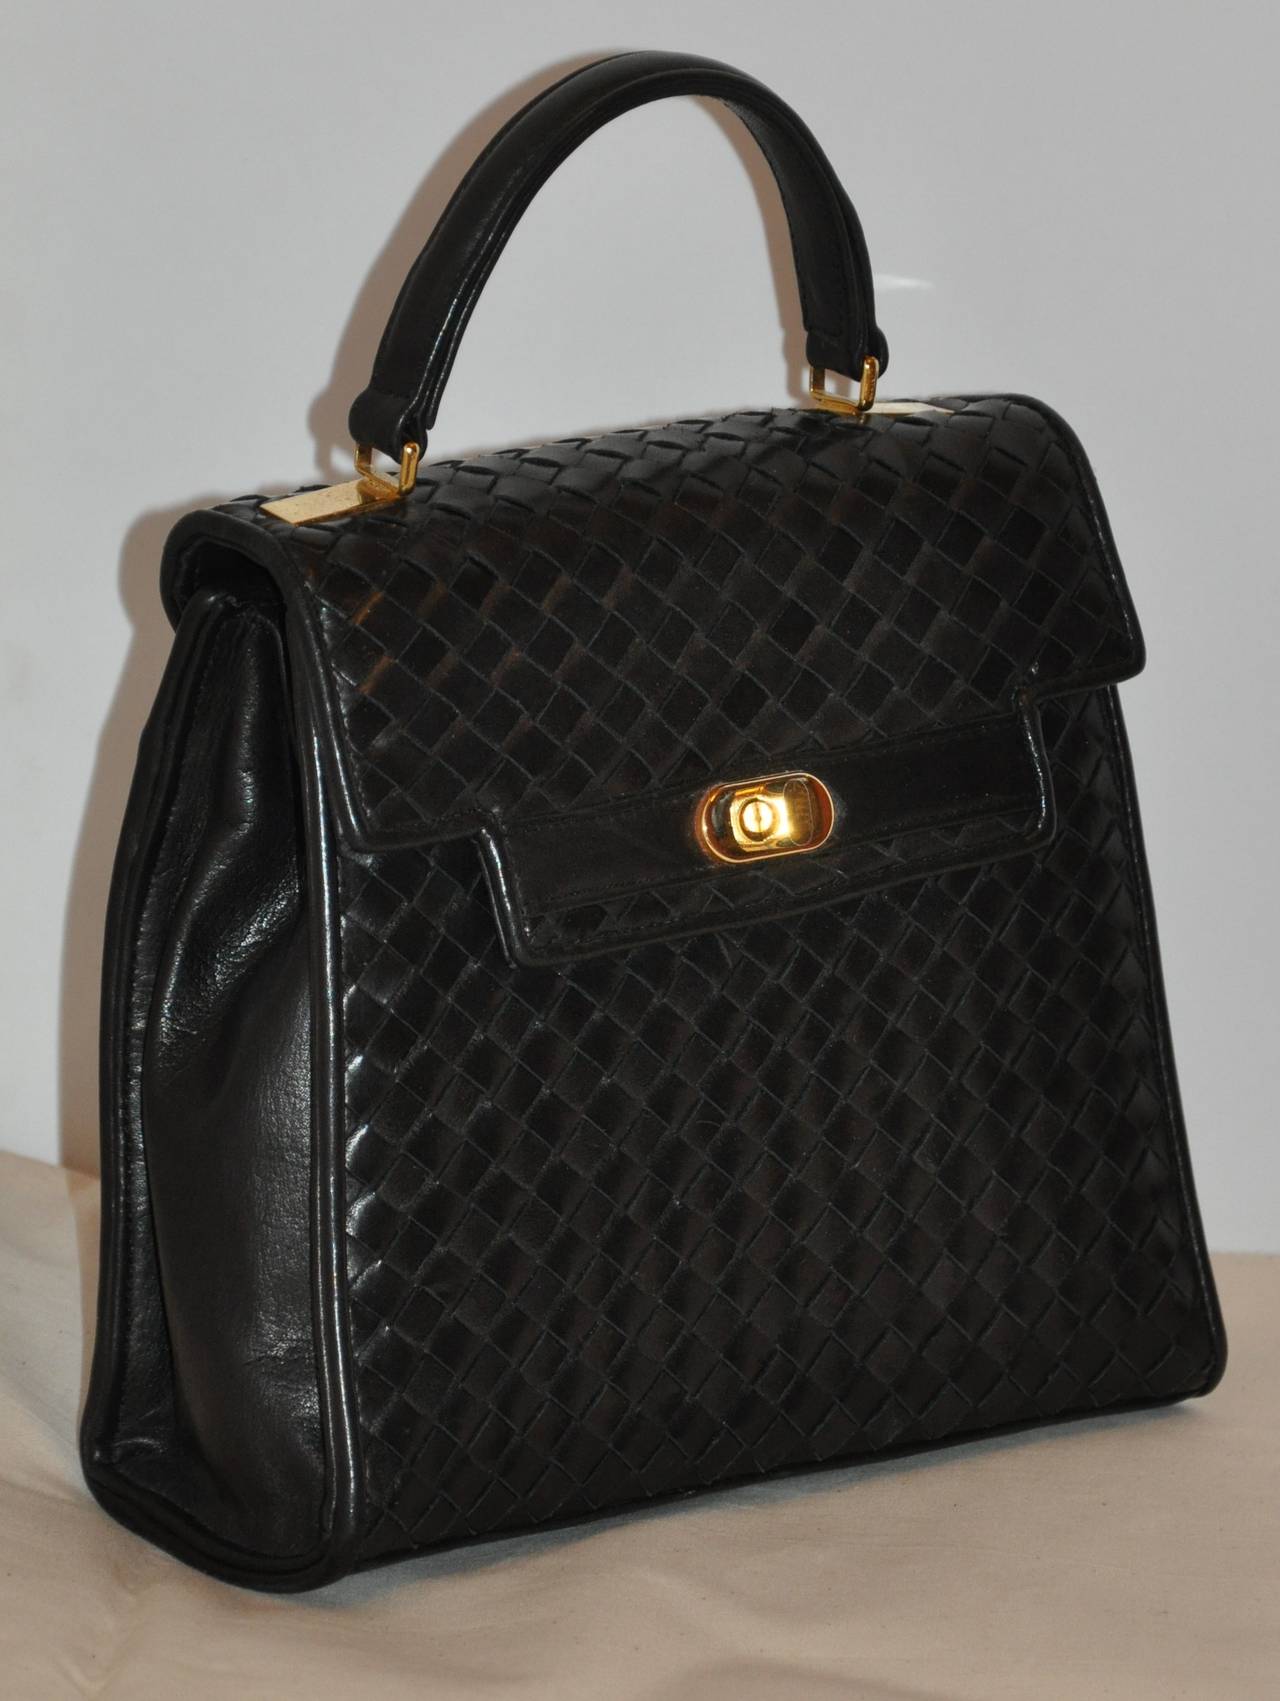 Saks Fifth Avenue black lambskin woven leather handbag has gold hardware and accented with an exterior compartment on the backside. 
   The handbag measures 8